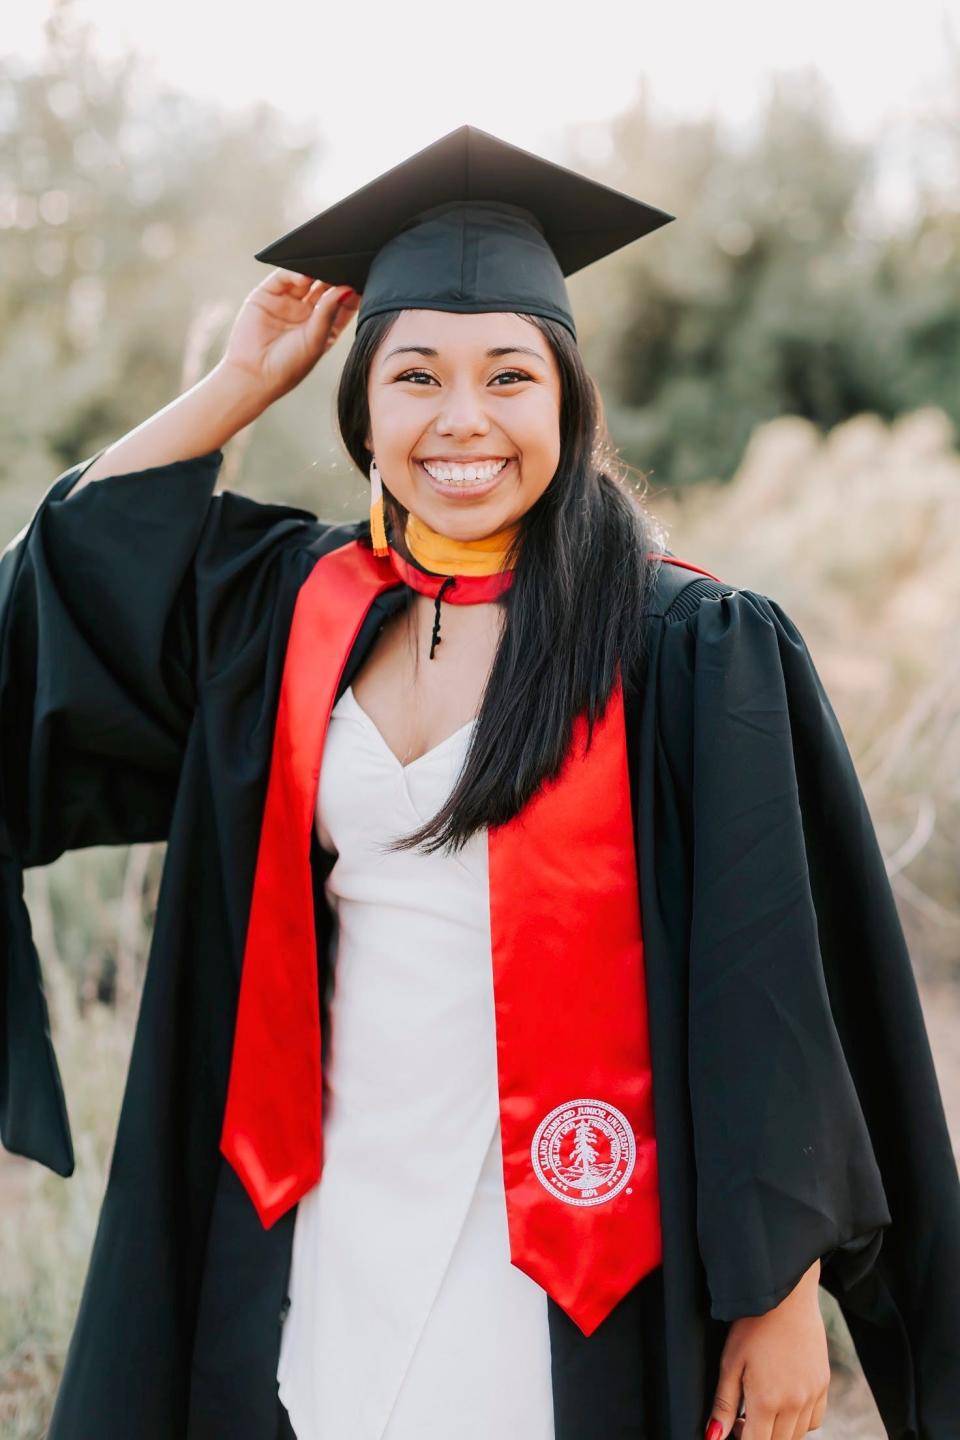 Gianna Nino-Tapias graduated with a master's degree in epidemiology from Stanford in June and is going back to start medical school this month. She wants to become a doctor so she can help people like her mother, who struggle to get proper help from doctors because they don't speak English well.